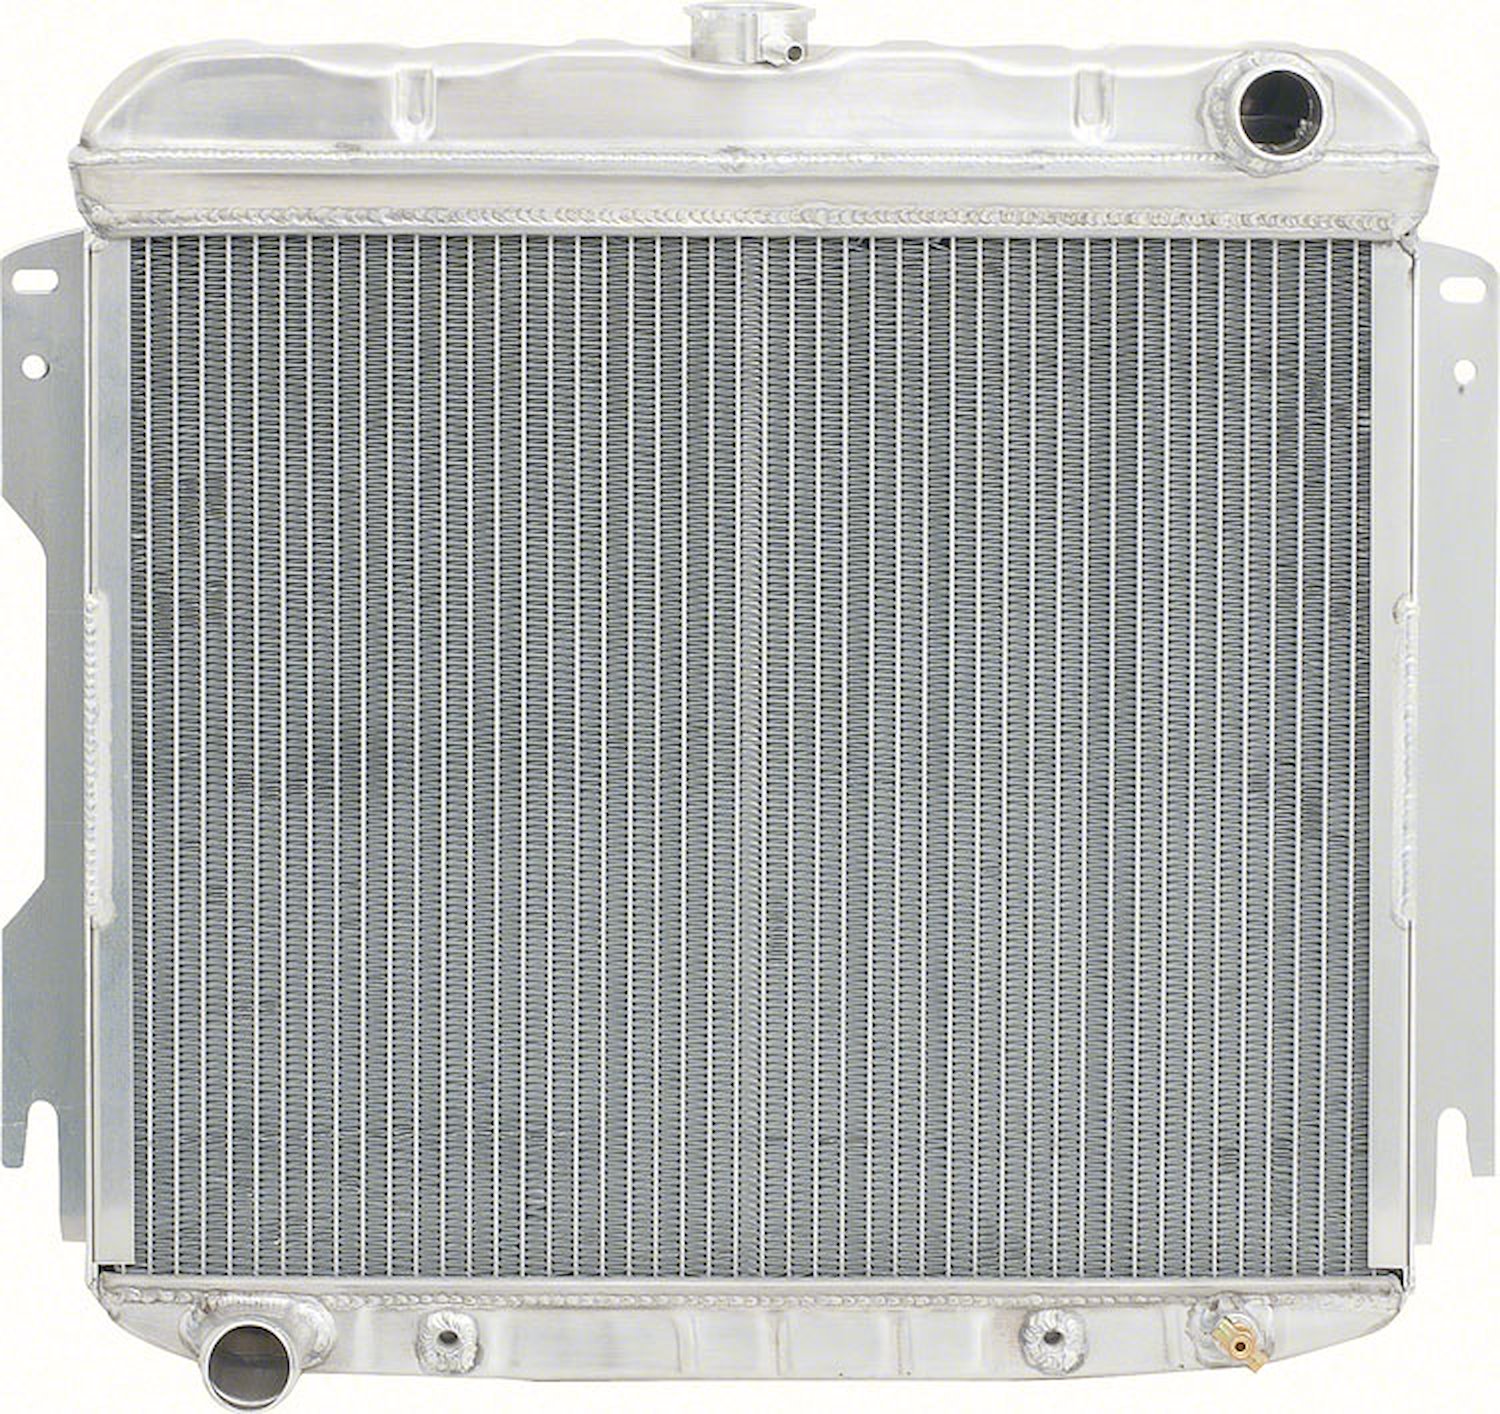 MB2352A Radiator 1963-64 Dodge B-Body 318Ci V8 With Automatic Trans 2 Row Aluminum Desert Cooler